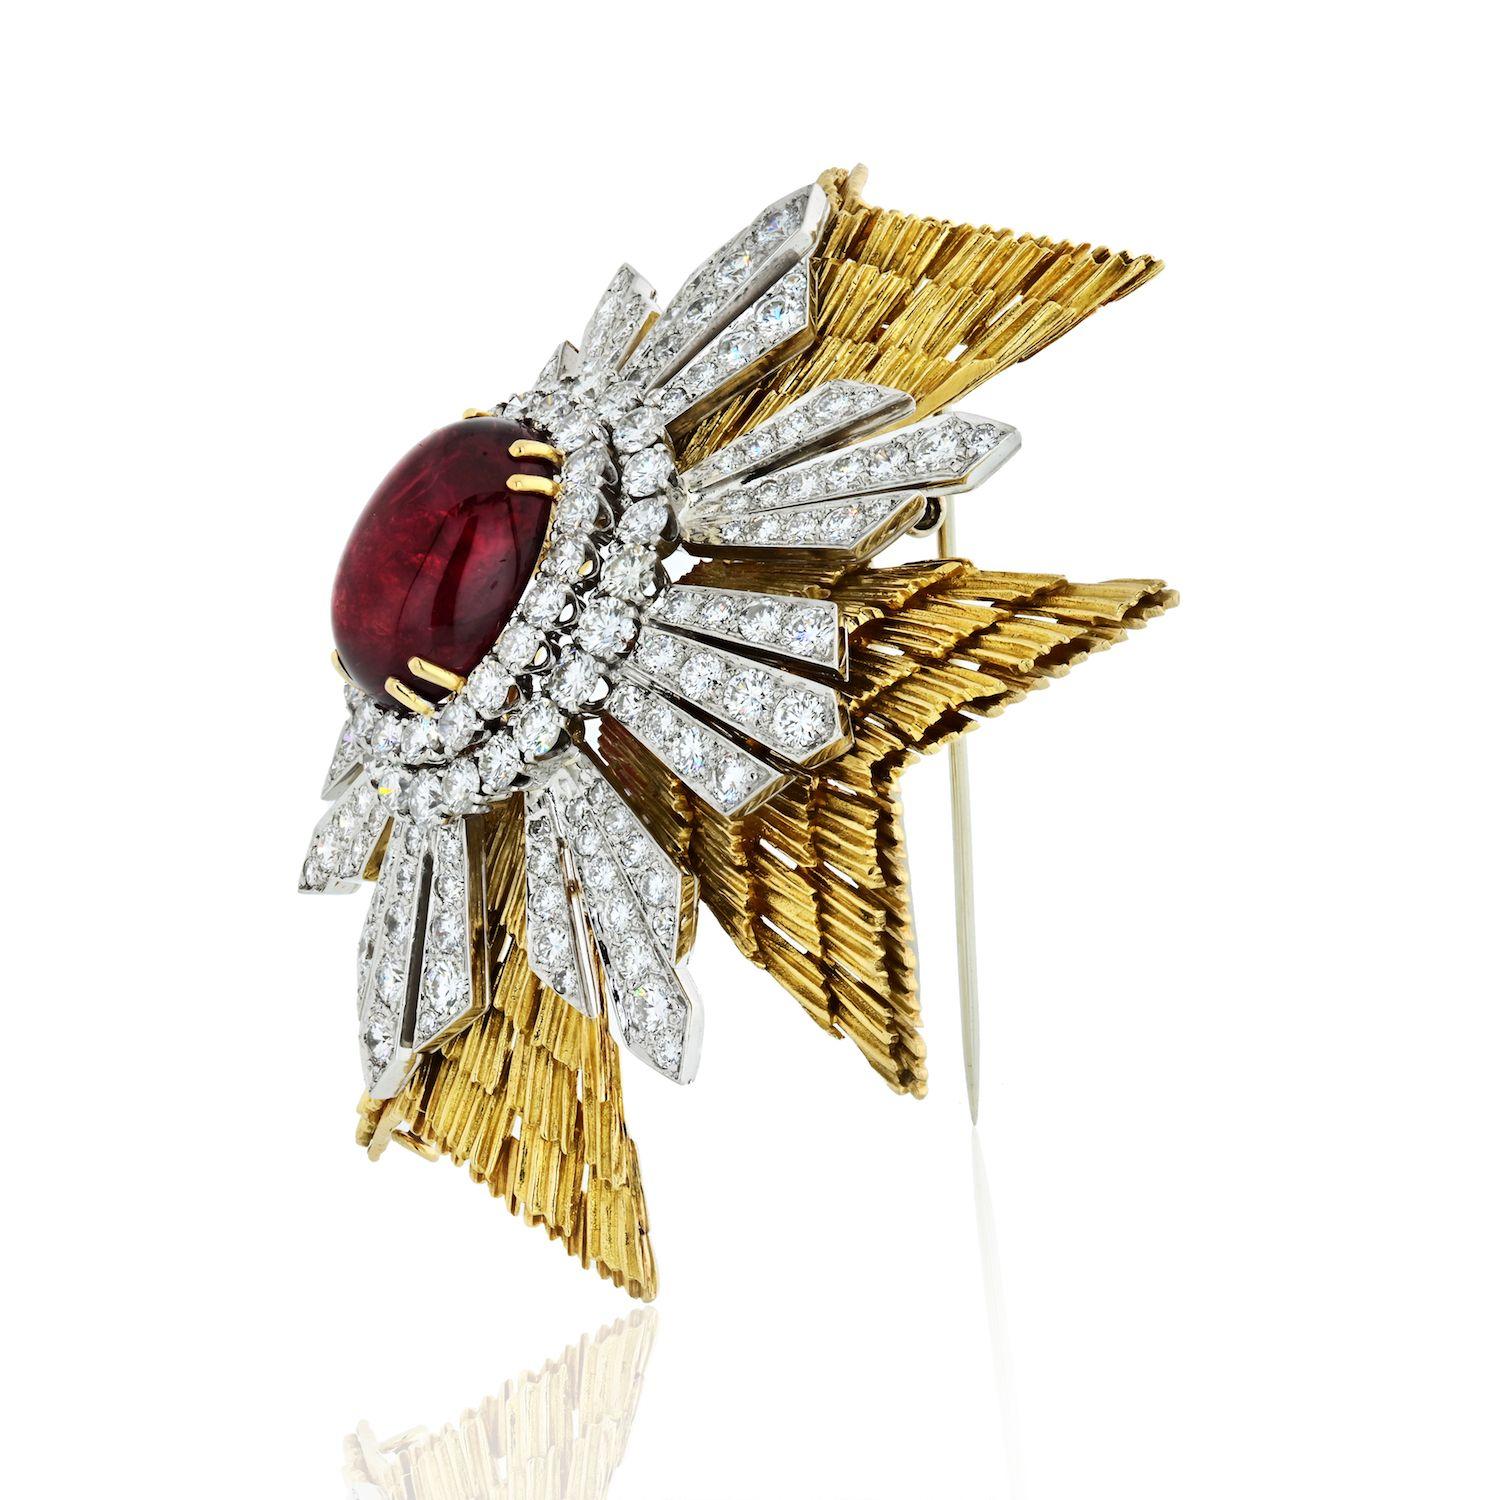 Designed as a textured gold Maltese cross, centering a cabochon ruby, accented by 164 round brilliant cut diamonds. Can be worn as a pendant and a brooch. Heavy piece of an approx. 2.25 inches. 88gr.
